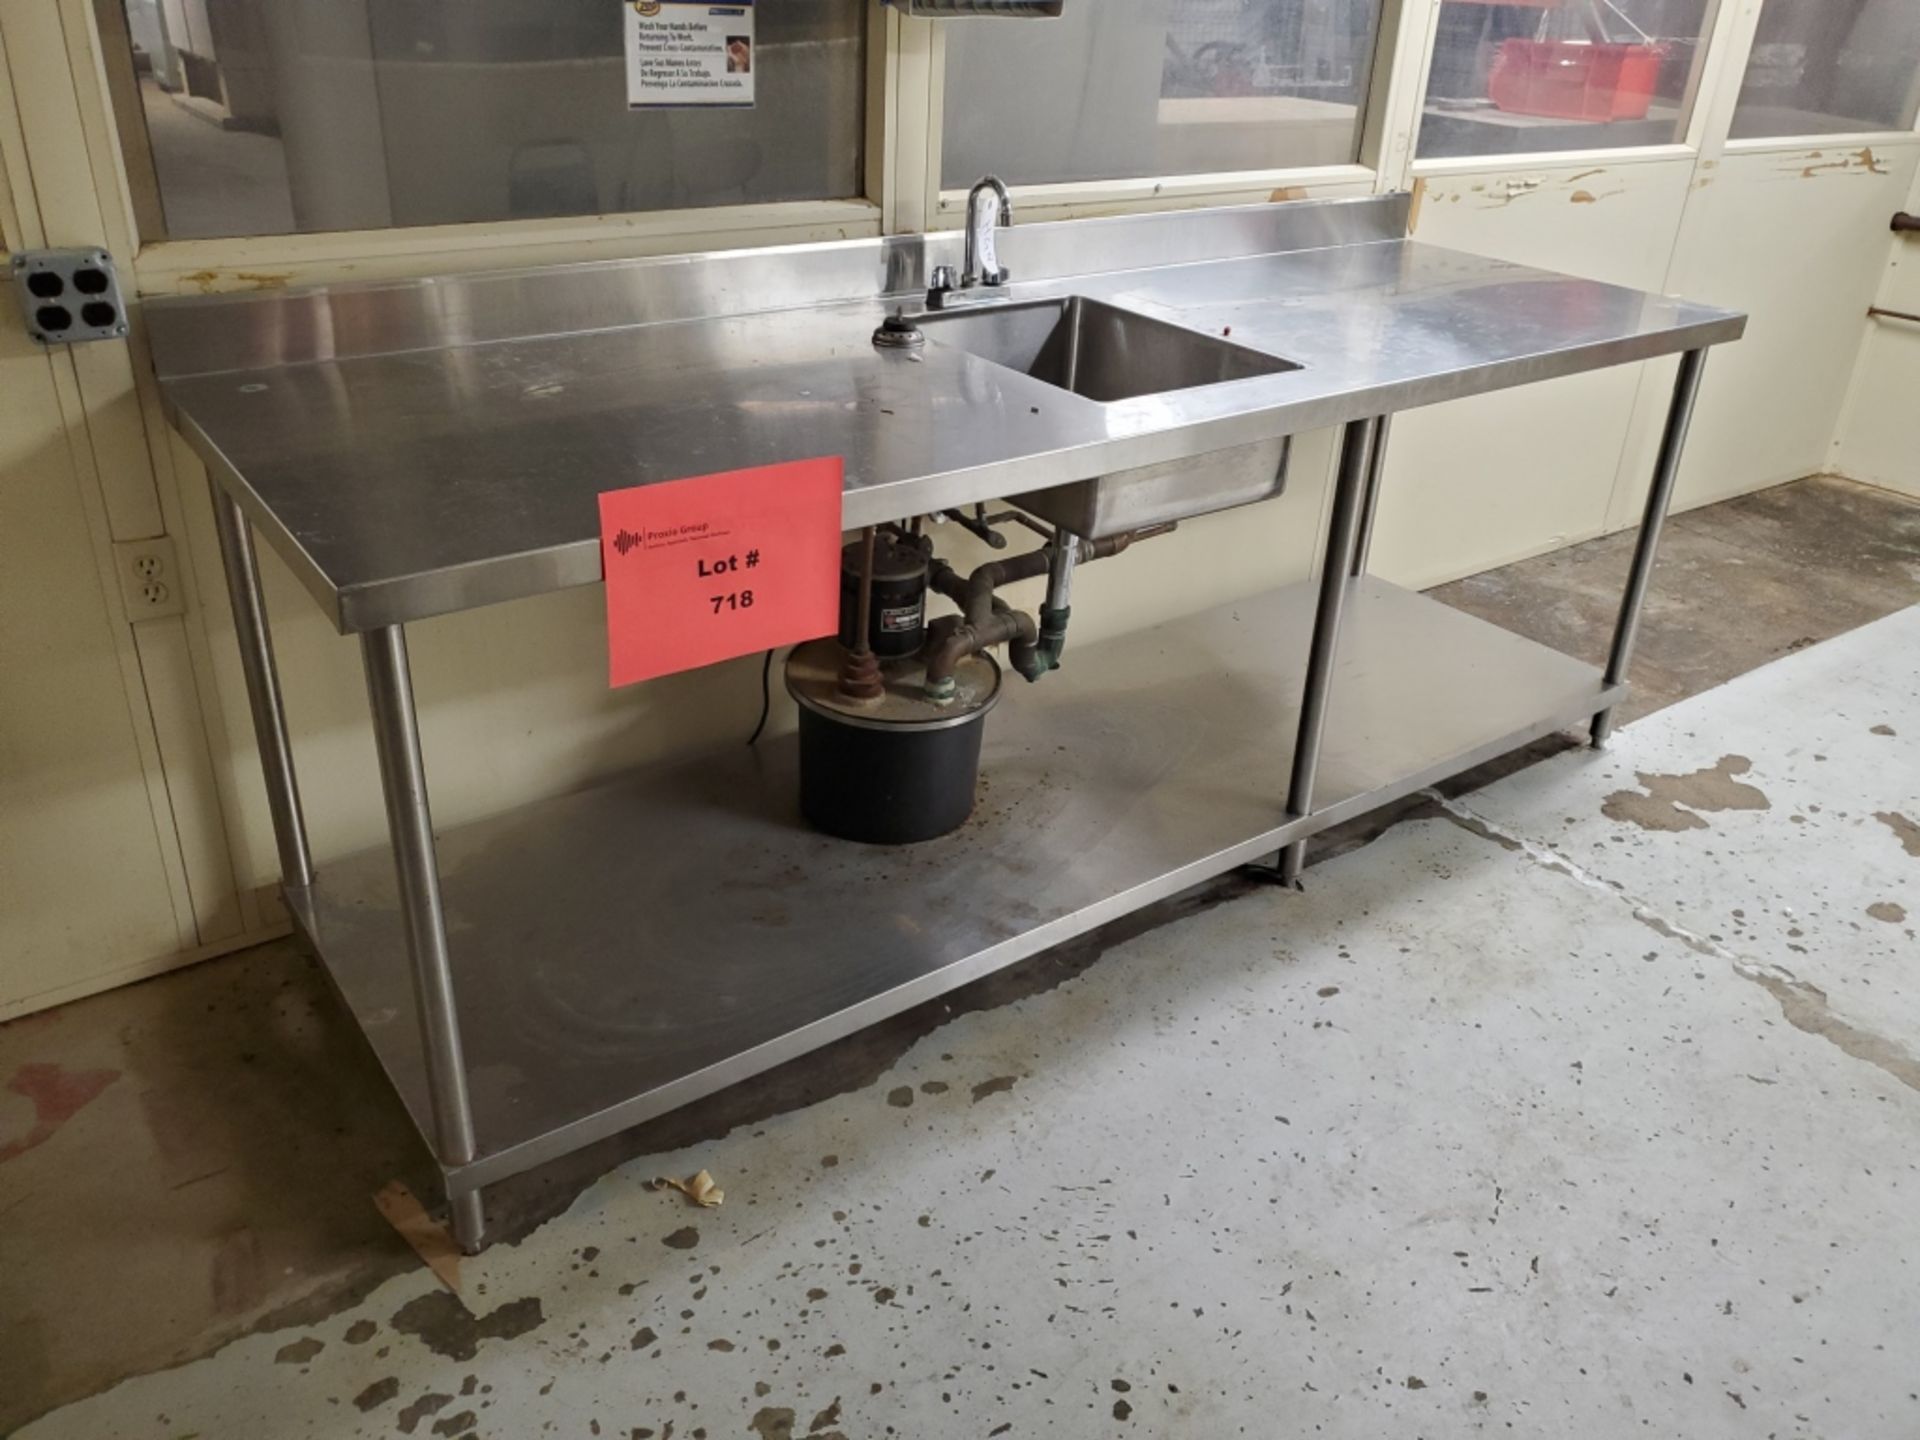 Stainless Steel Workbench w/ Associated Sink - Image 2 of 2